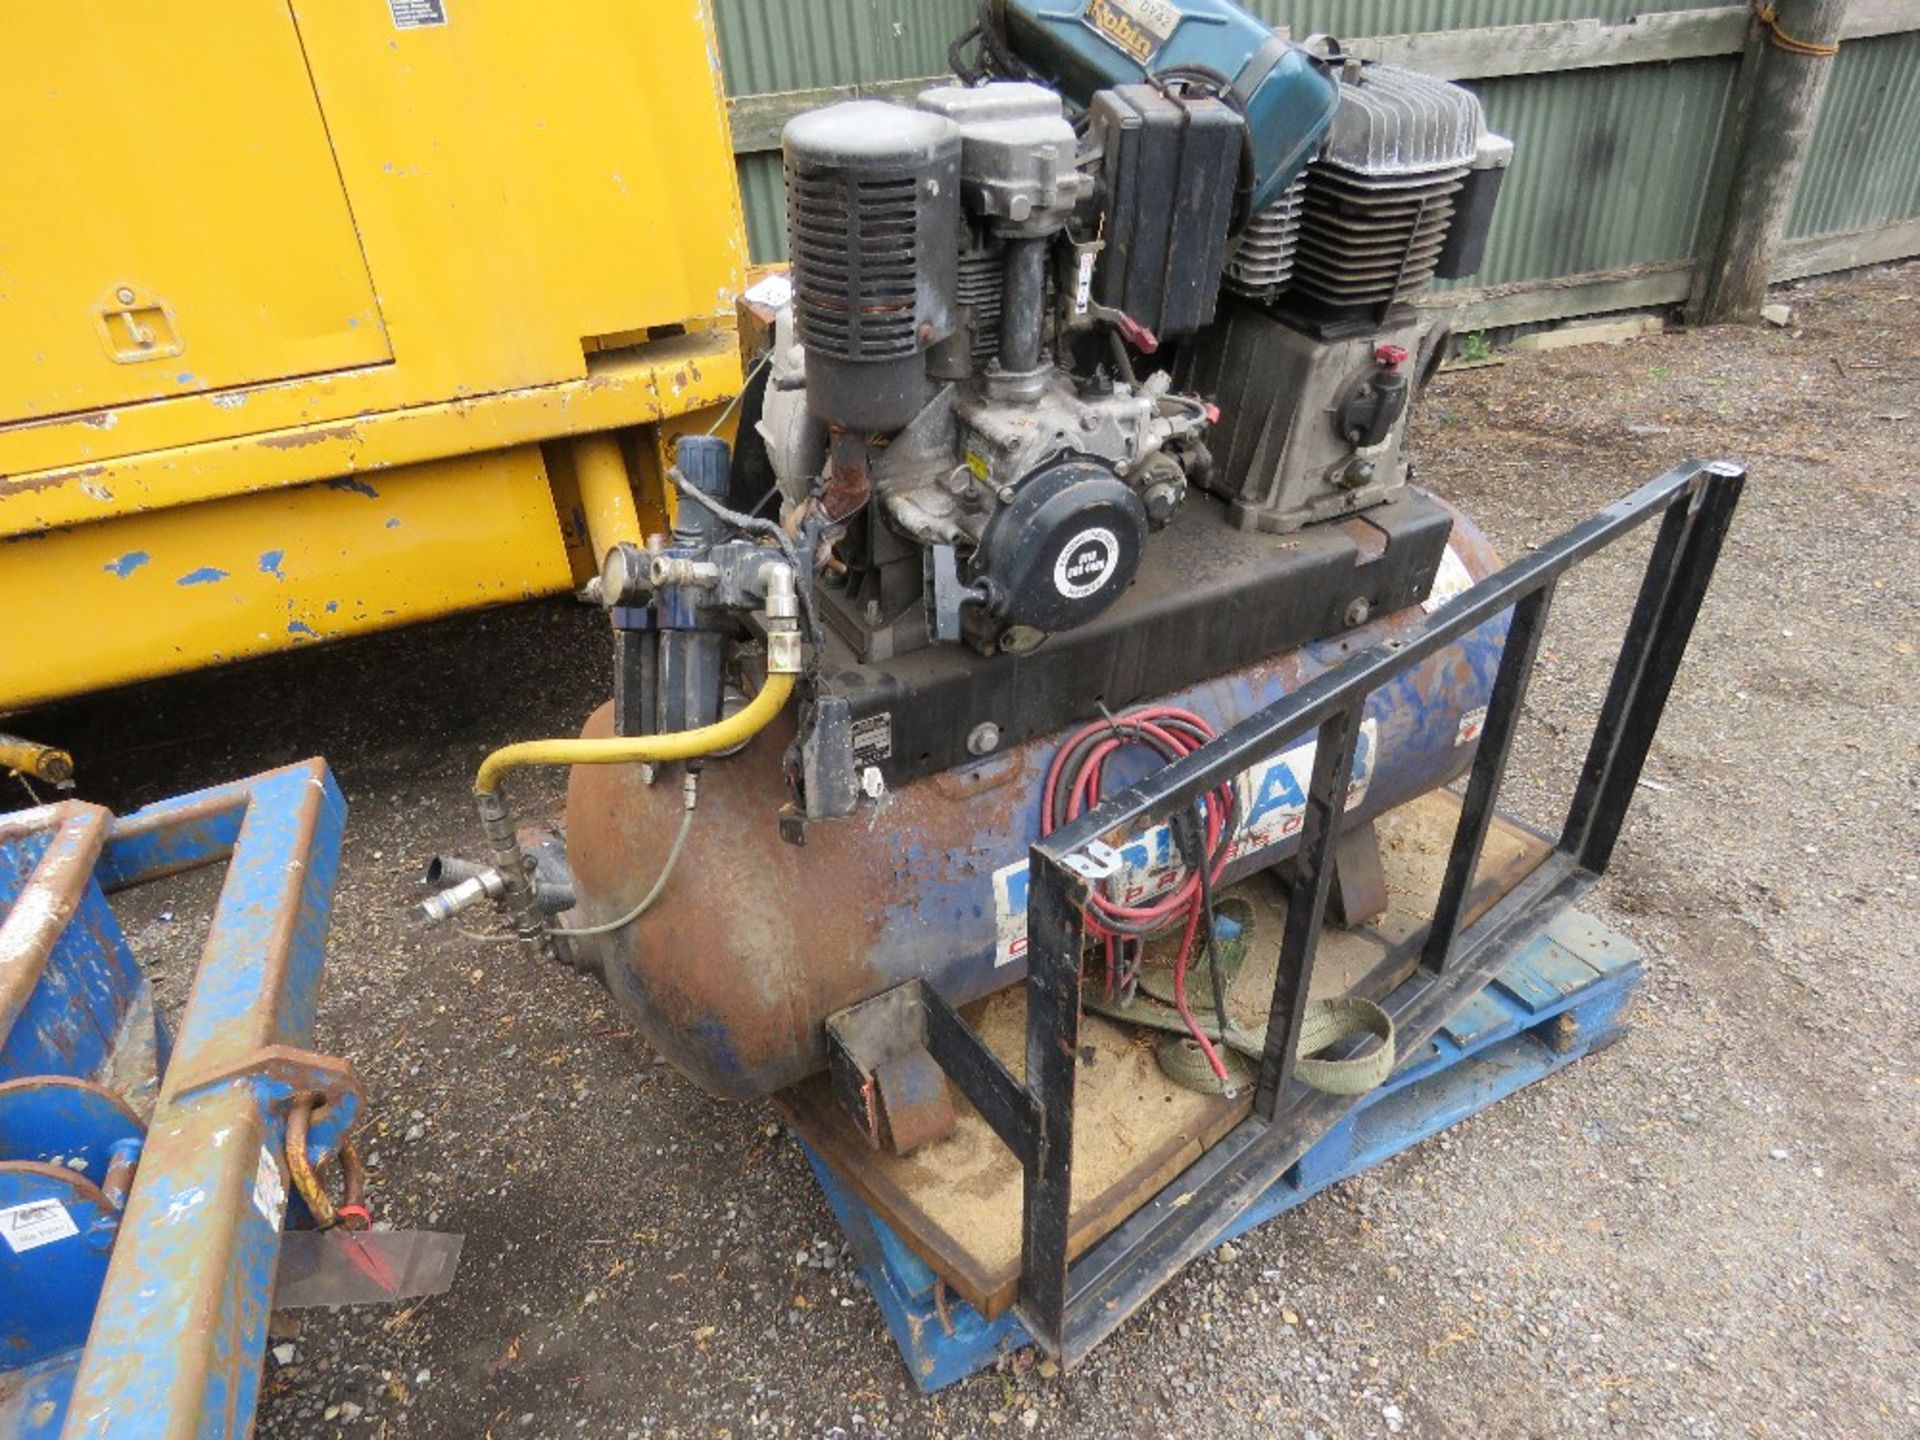 PSIBAR ROBIN ENGINED COMPRESSOR WITH VAN MOUNTING FRAME. SUITABLE FOR TYRE FITTER ETC. SEEN RUNNING - Image 3 of 7